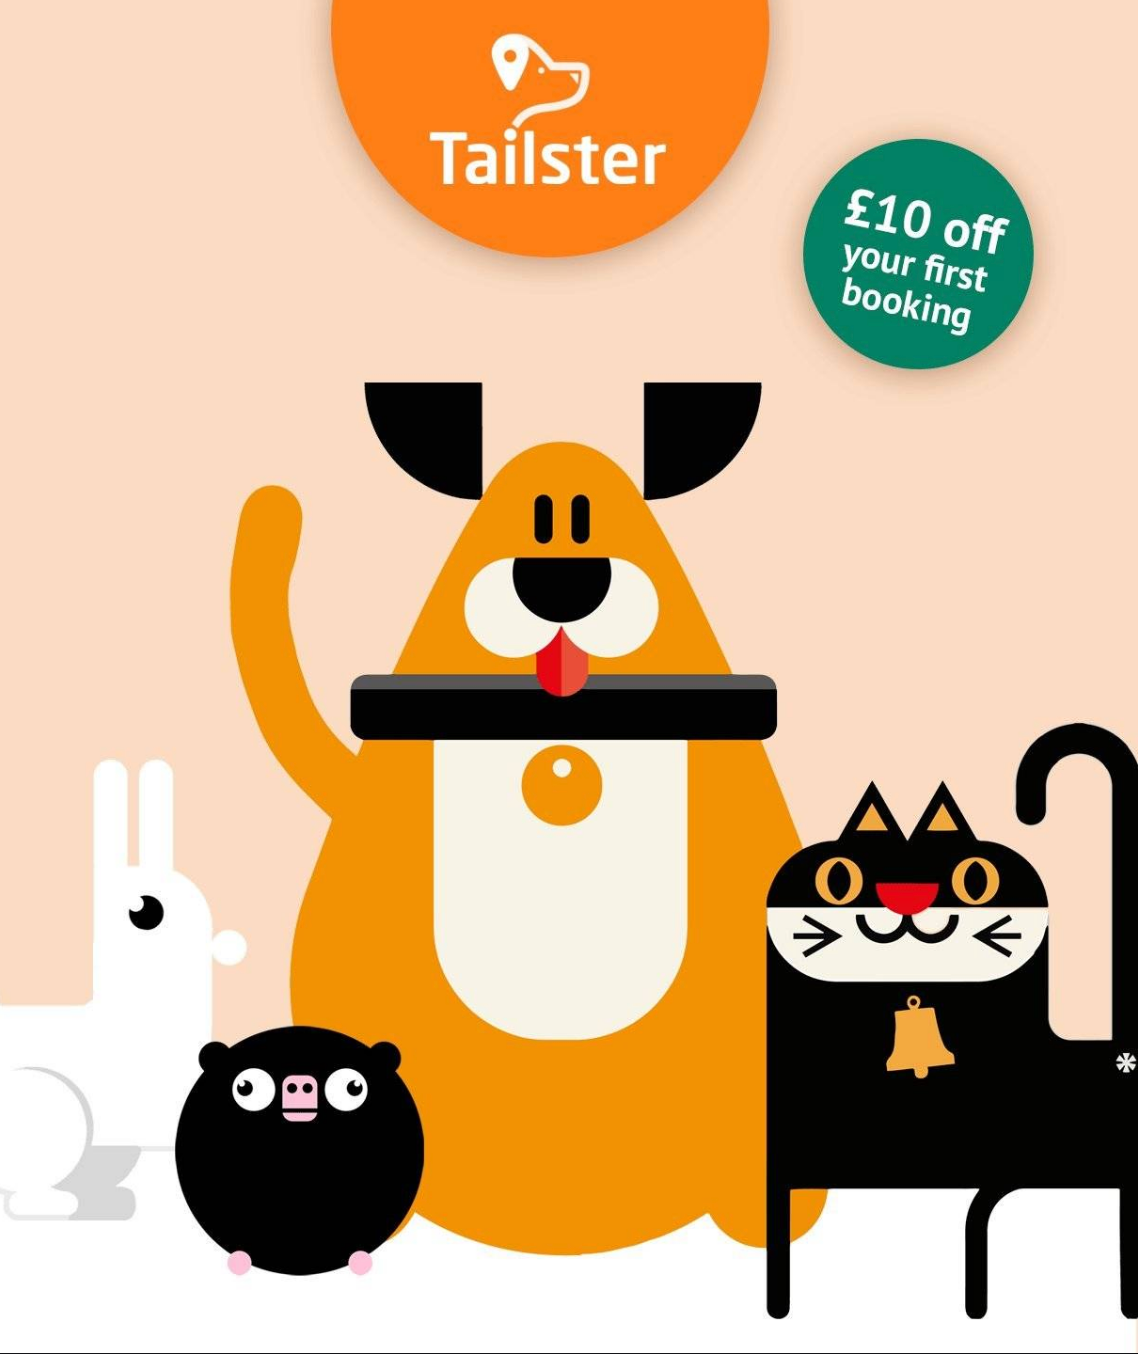 Tailster app